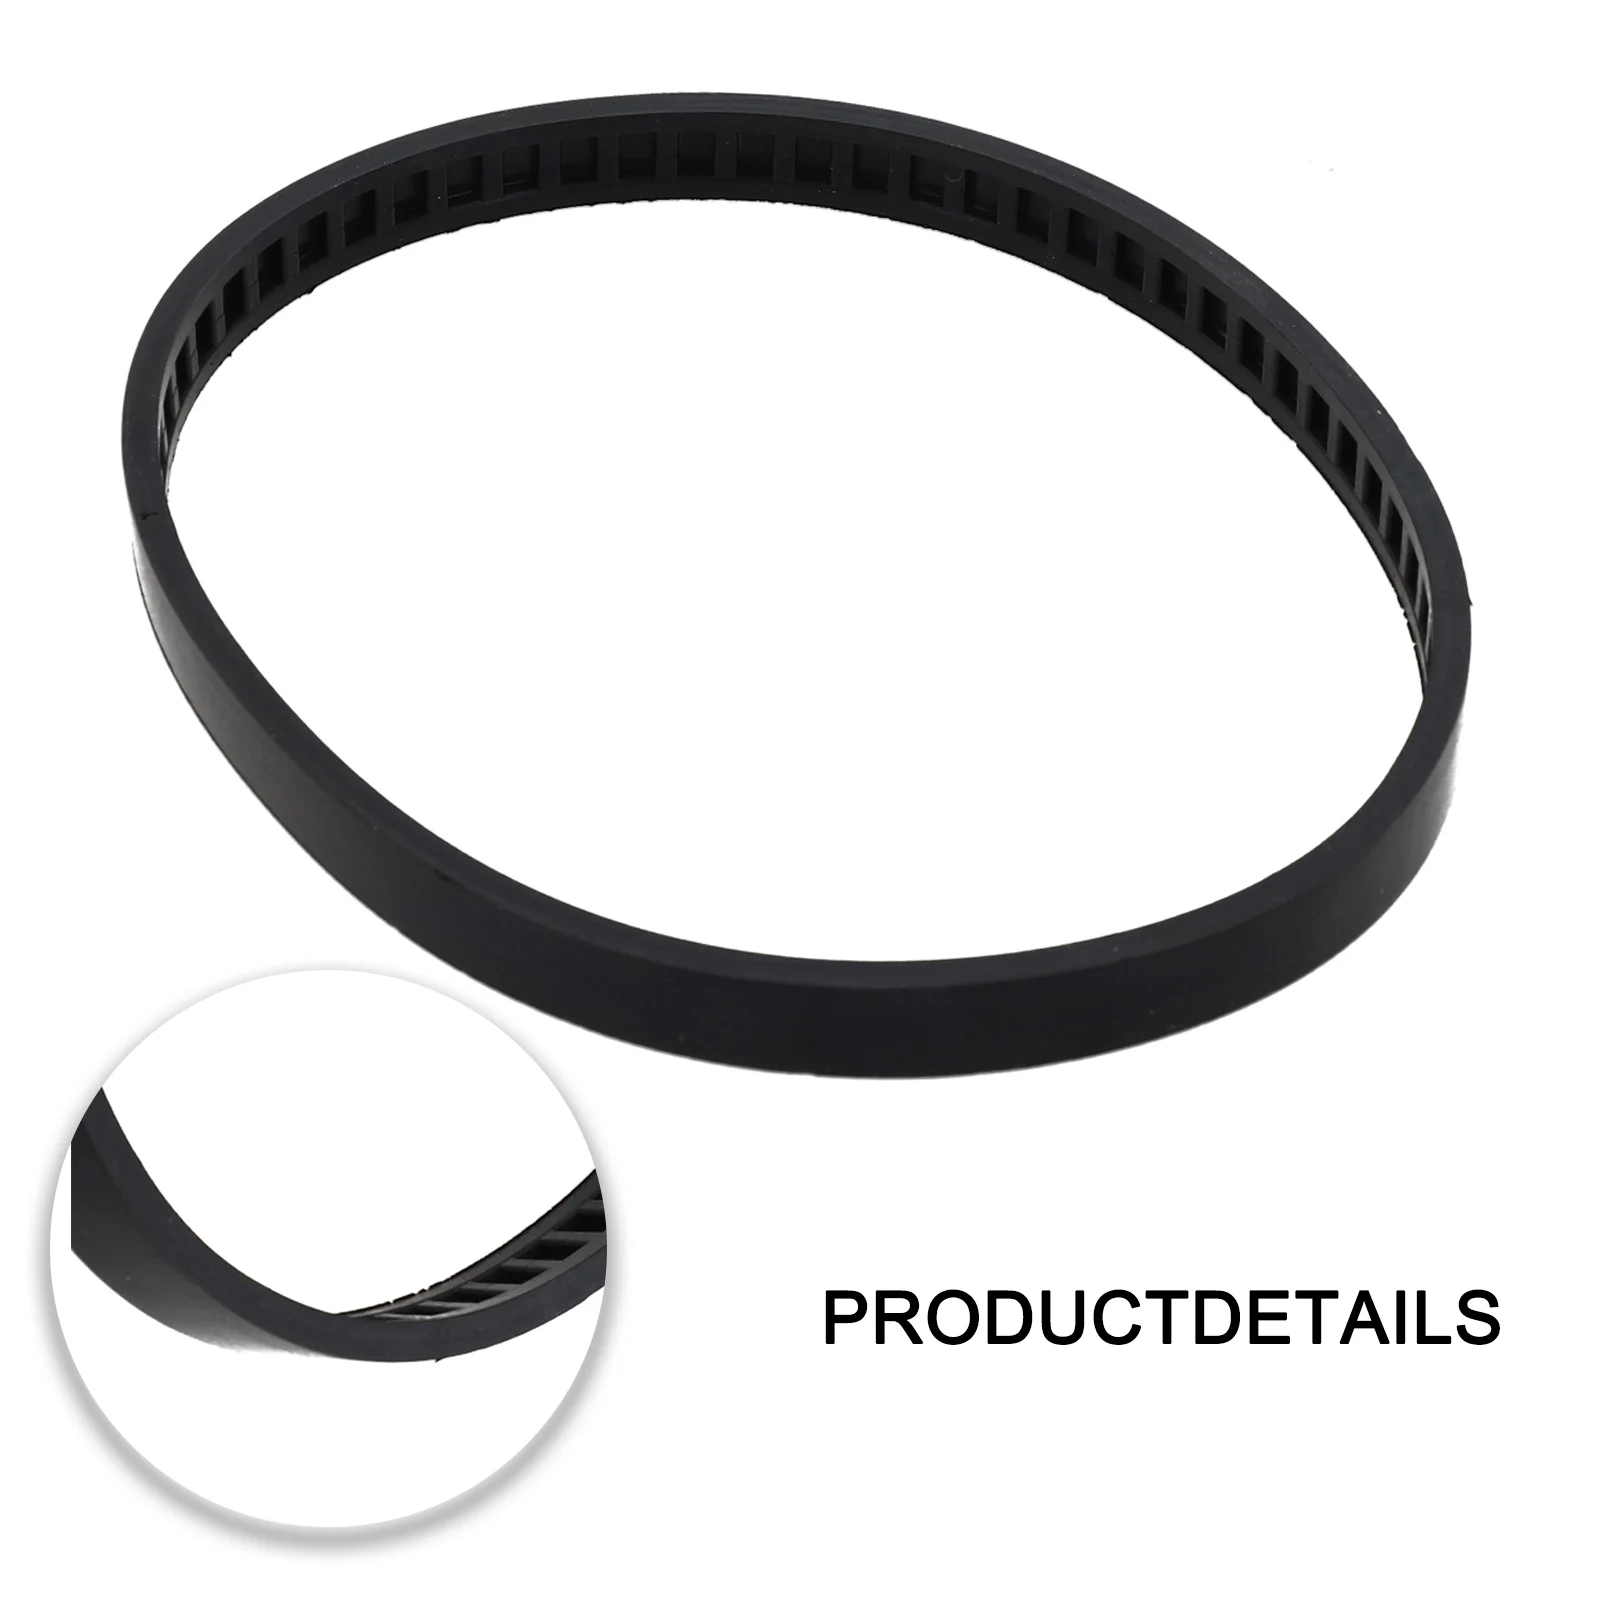 45-69-0010 Blade Pulley Tire For Milwaukee Bandsaw Part Deep Cutting Blades Balck Elastic Rubber Belt For Bandsaw Blade belt pulley xl 19t bore 6 6 35 8 10 12 14 15 16 17 19 20mm alloy toothed pulley teeth pitch 5 08mm for width 15mm xl rubber belt